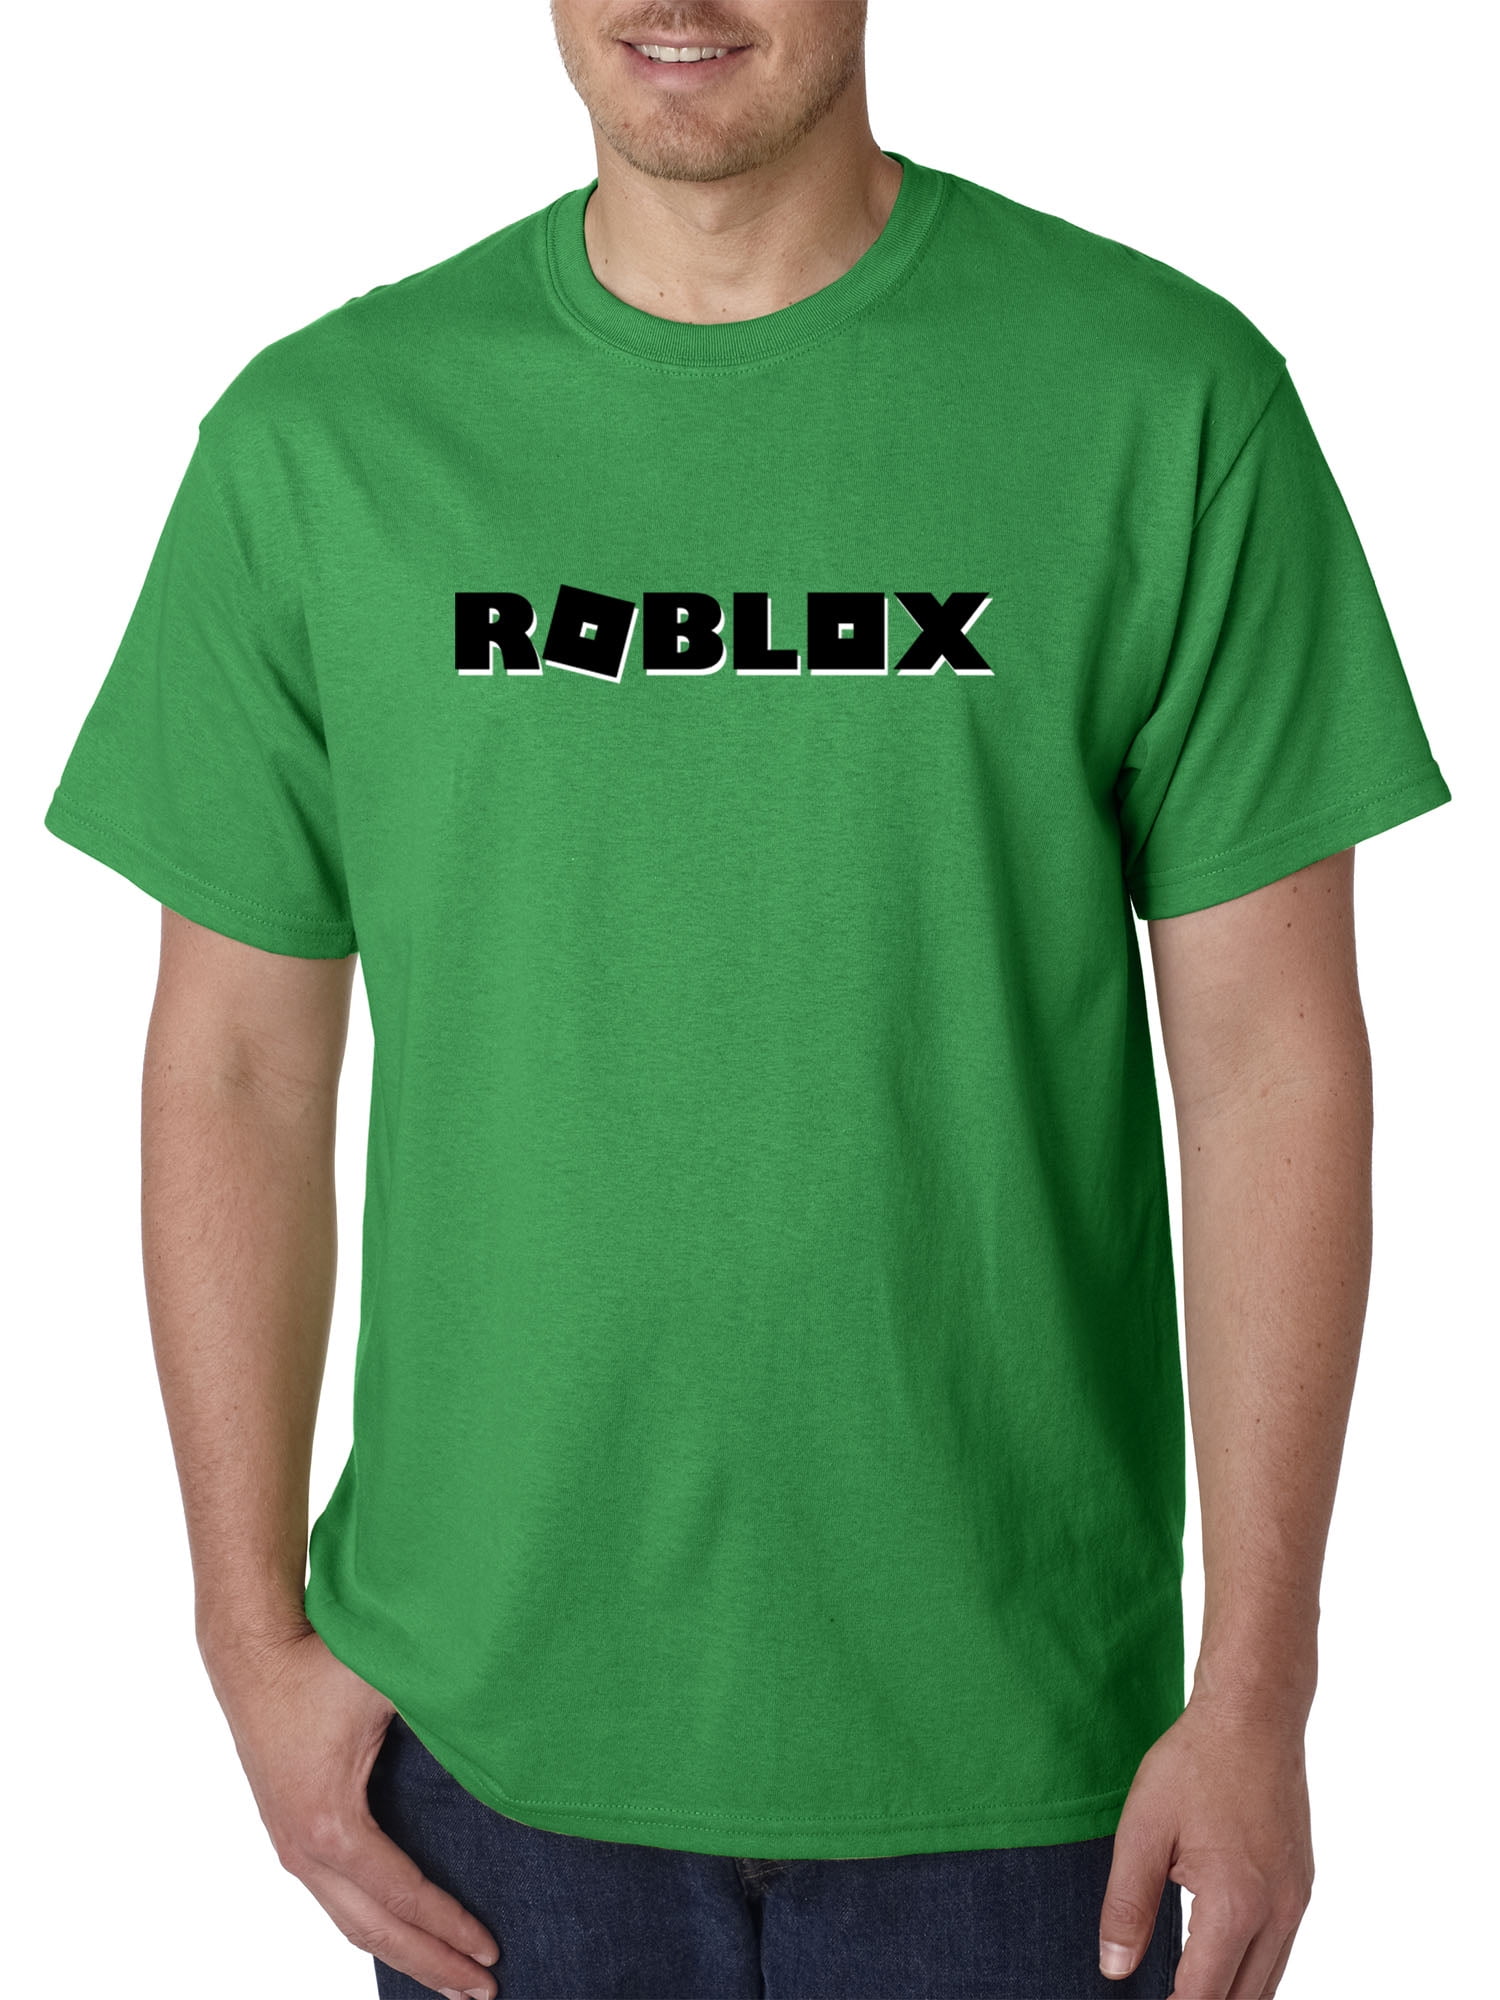 Trendy Usa Trendy Usa 1168 Unisex T Shirt Roblox Block Logo Game Accent Small Kelly Green Walmart Com - how to get shirts before they release roblox